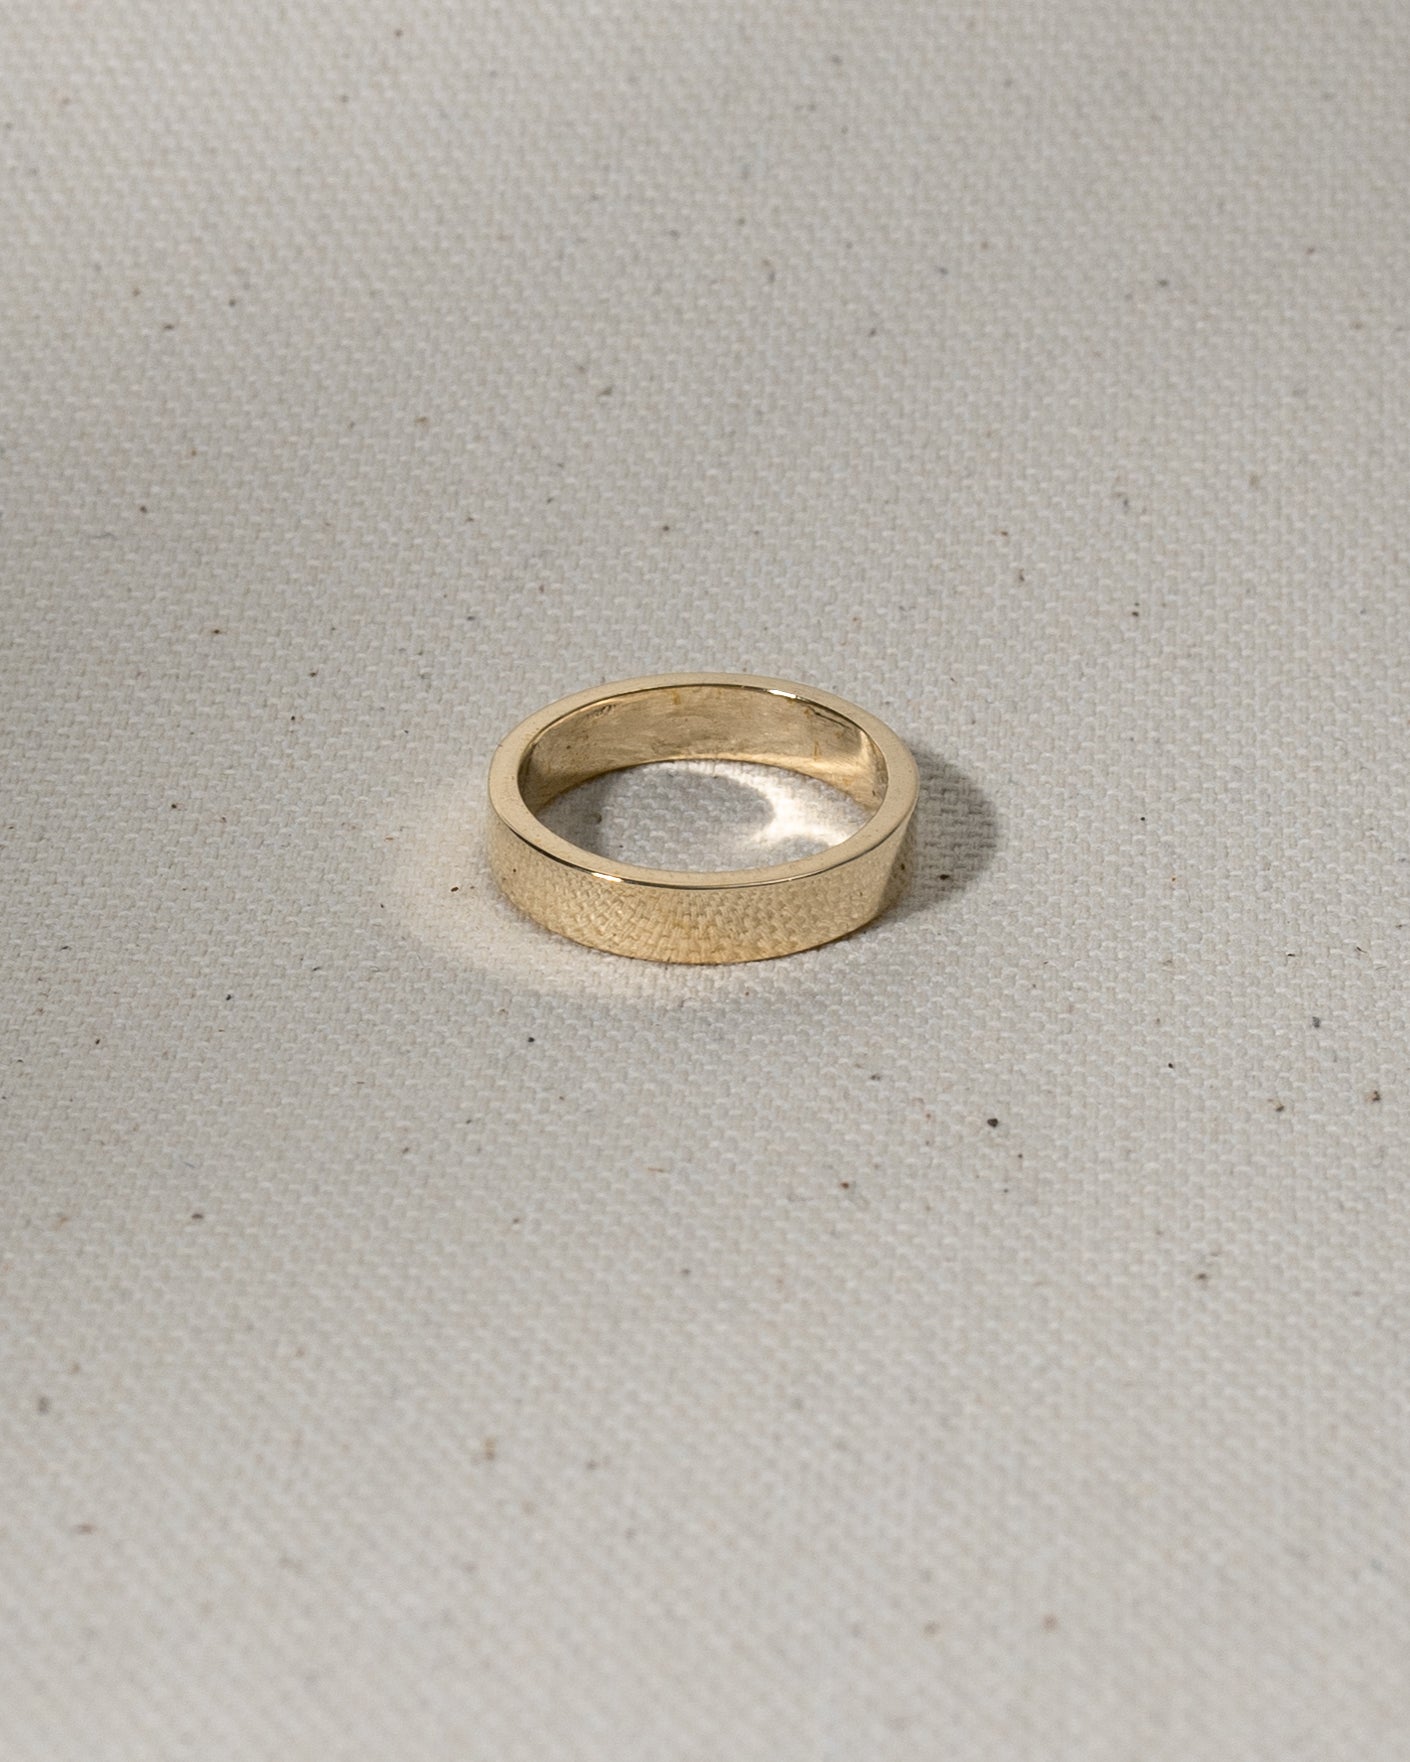 Reflection Ring at 4.0mm Wide